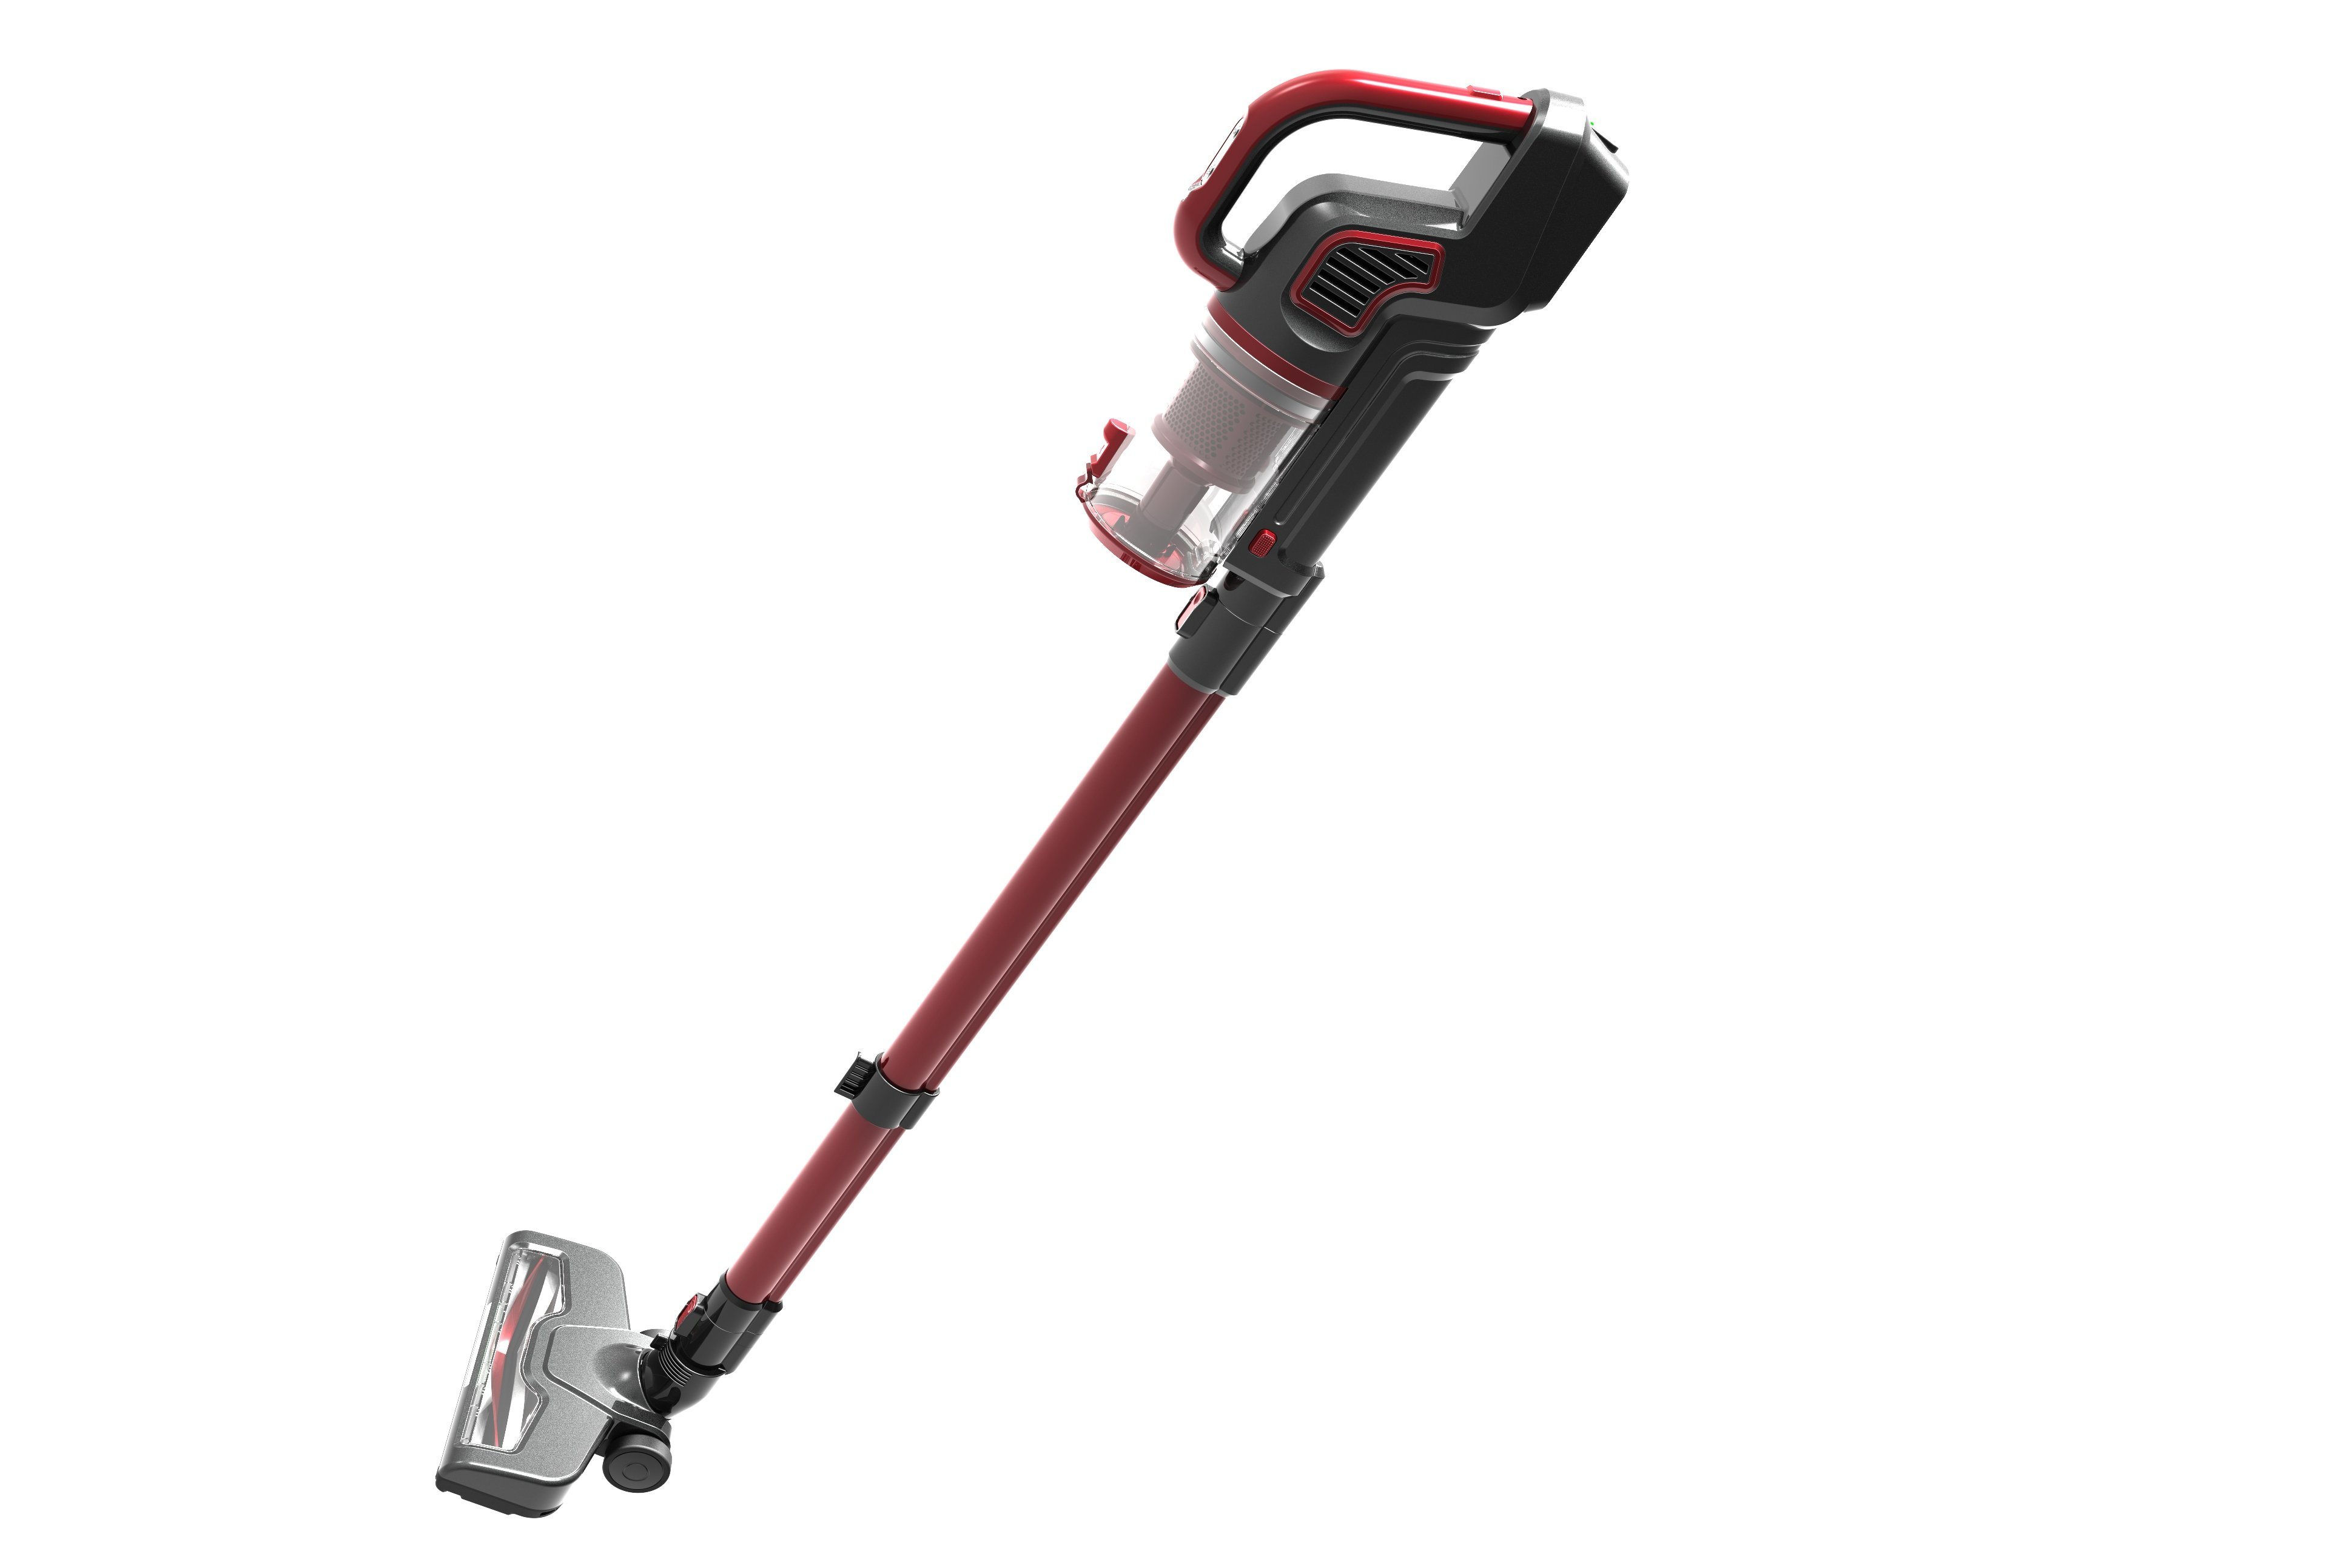 Cordless-Lithium-Battery-Stick-Handle-with-Mop-Function-Vacuum-Cleaner (5)